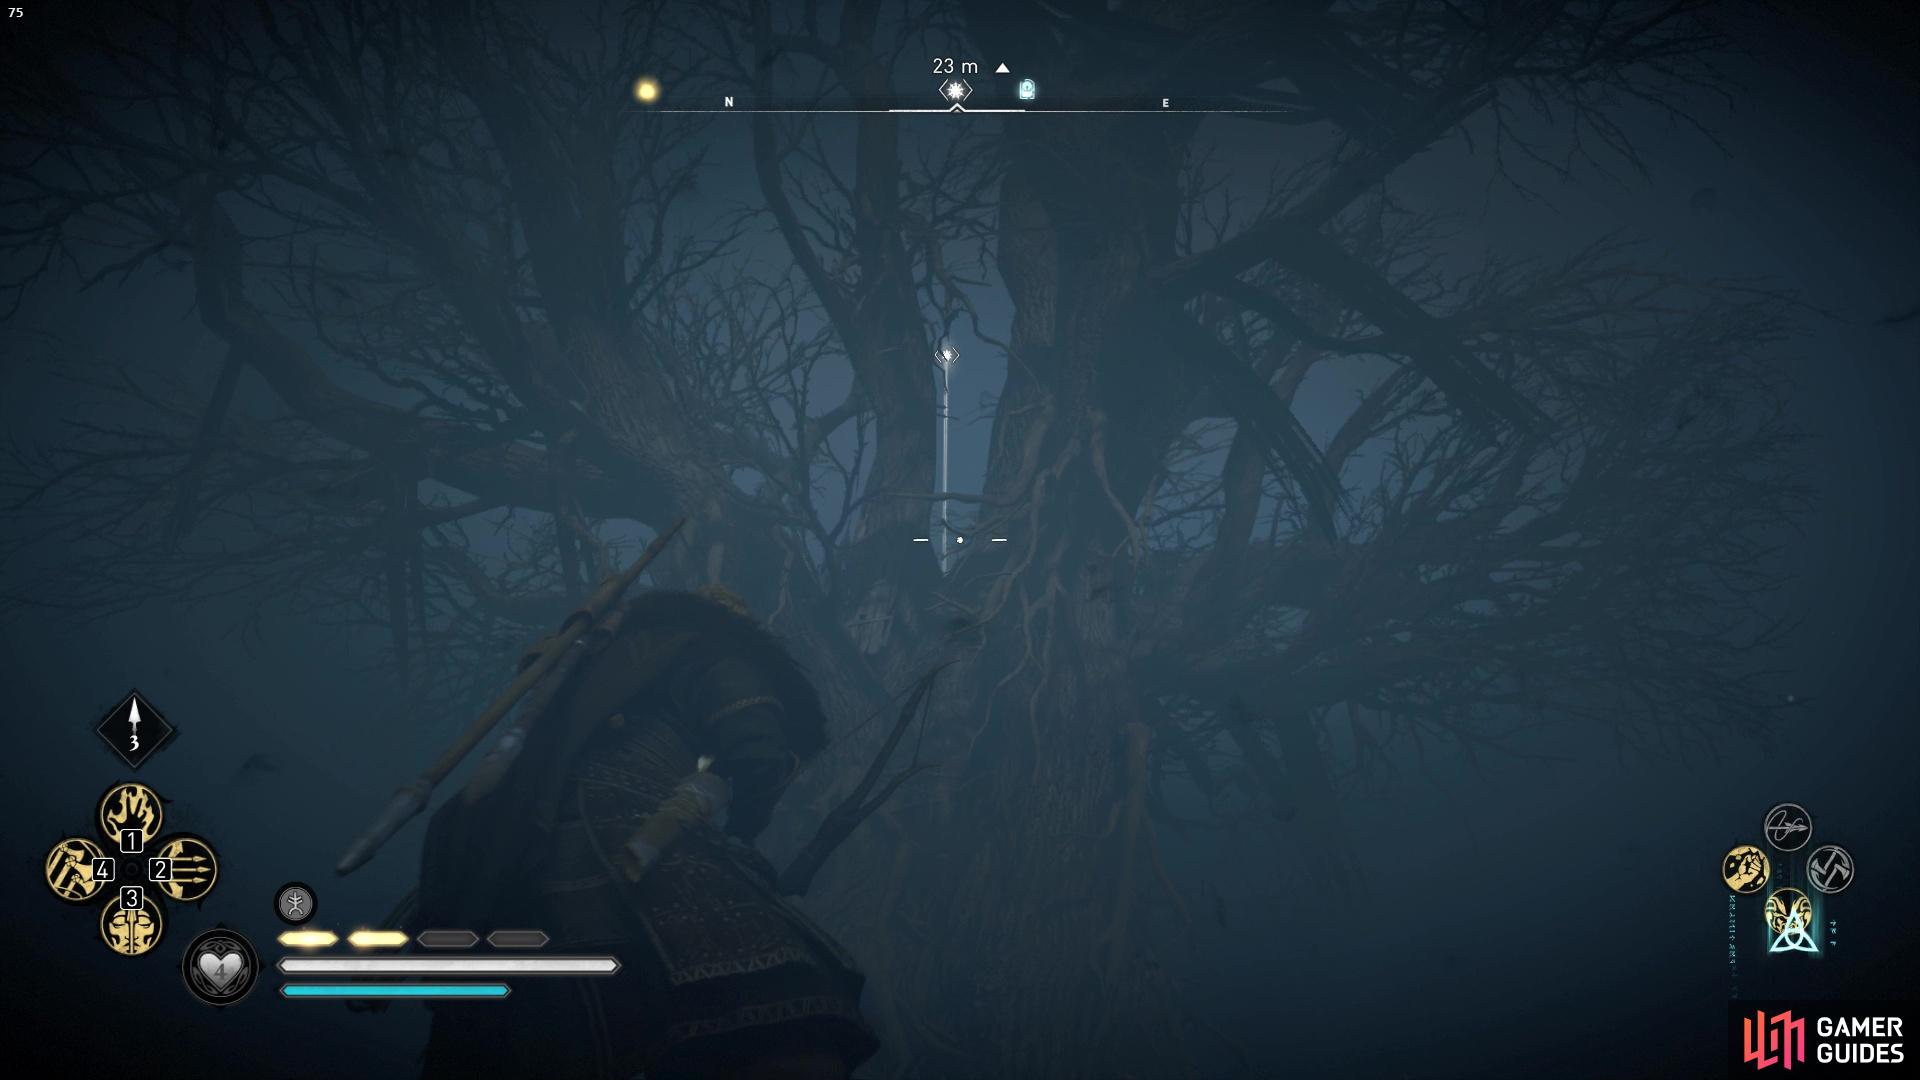 where youll need to shoot the cursed symbol in the tree.